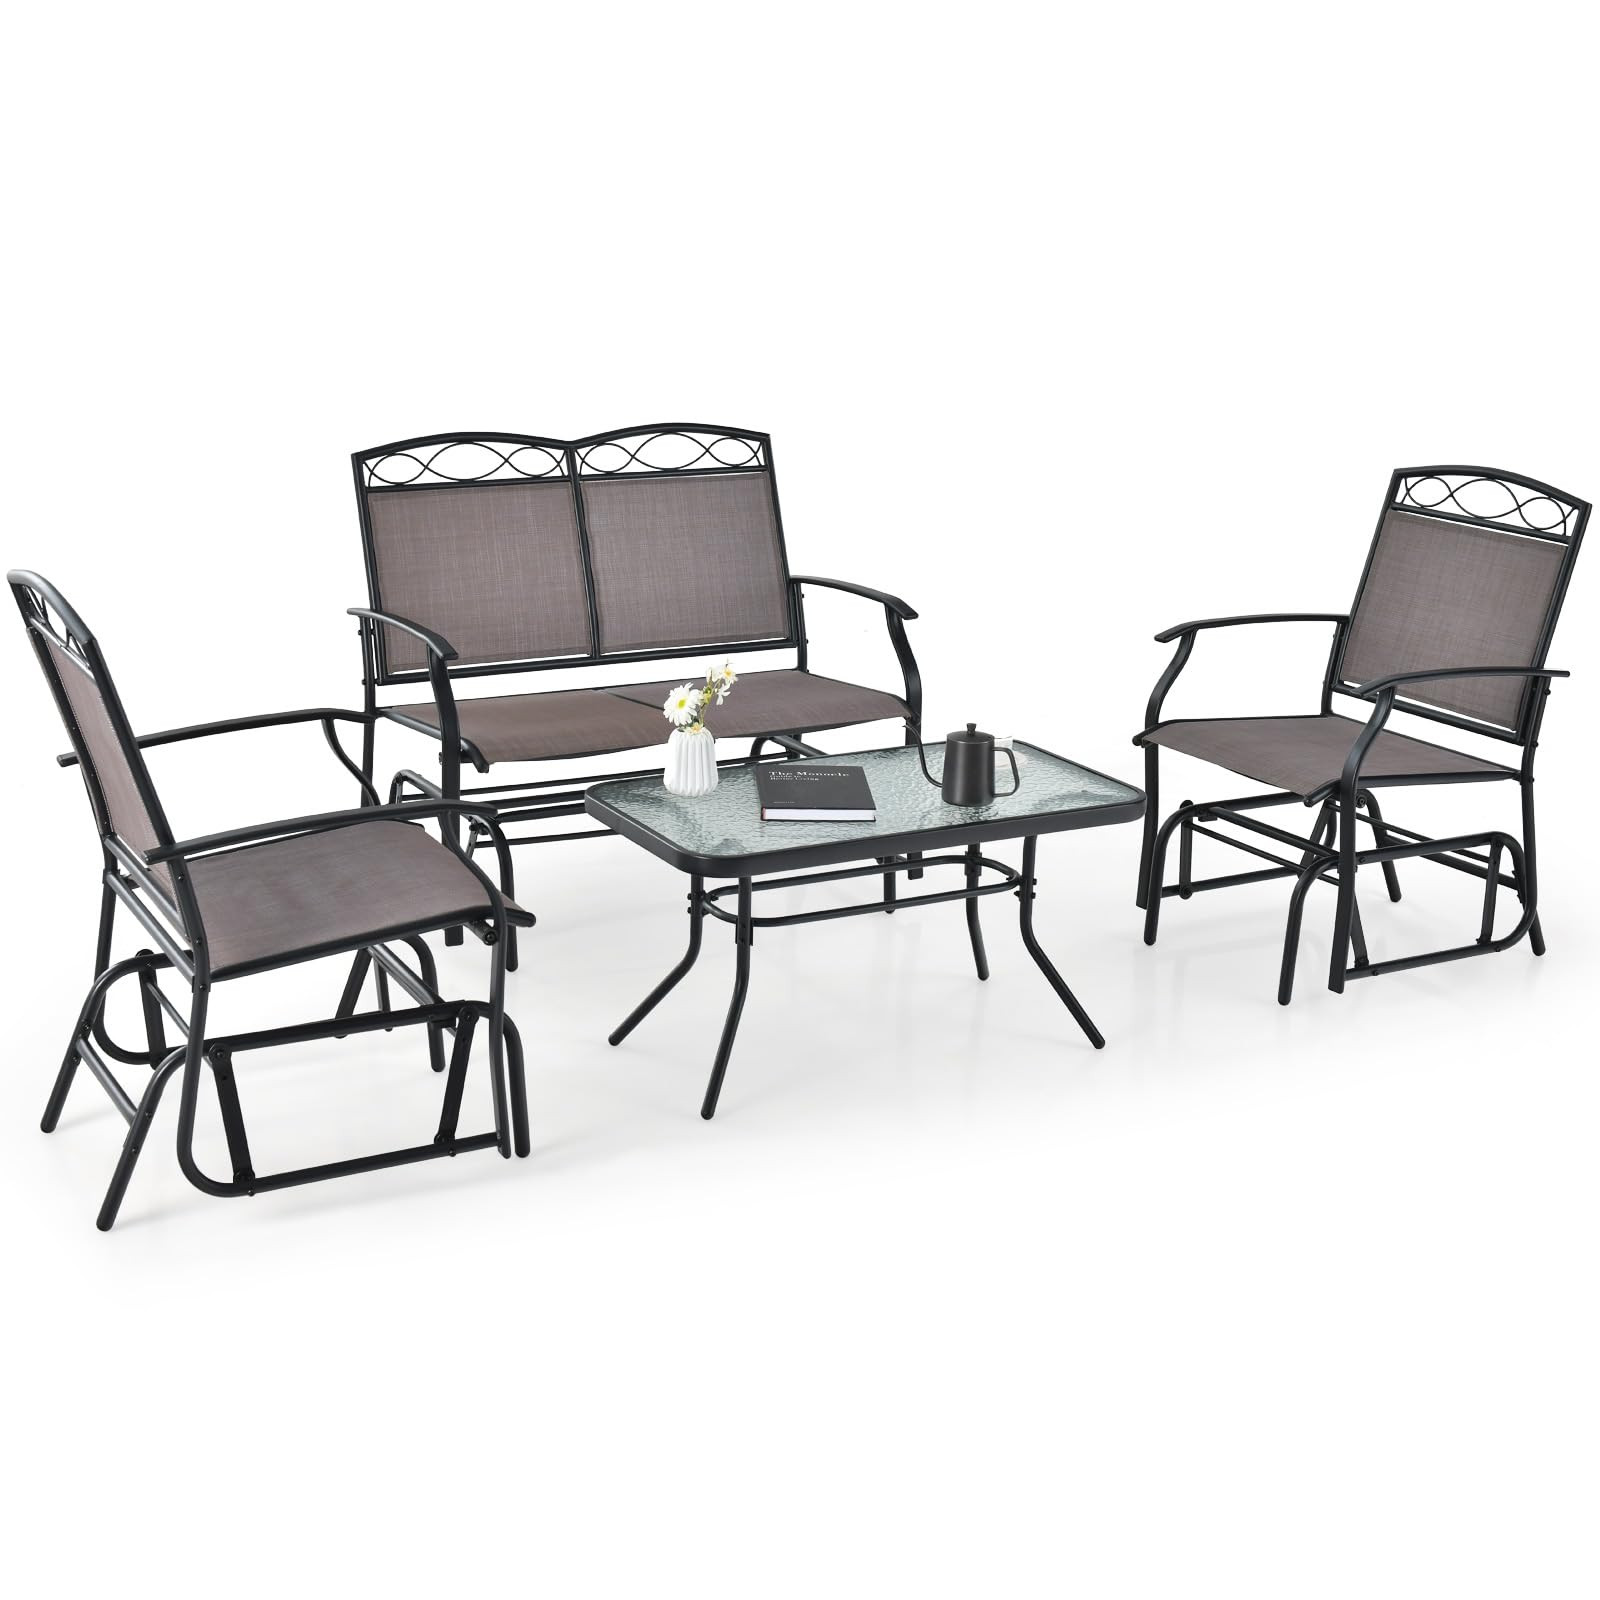 Giantex 4 or 2 PCS Outdoor Glider Chairs Set - Patio Furniture Set with Tempered Glass Table (4 PCS, Brown)